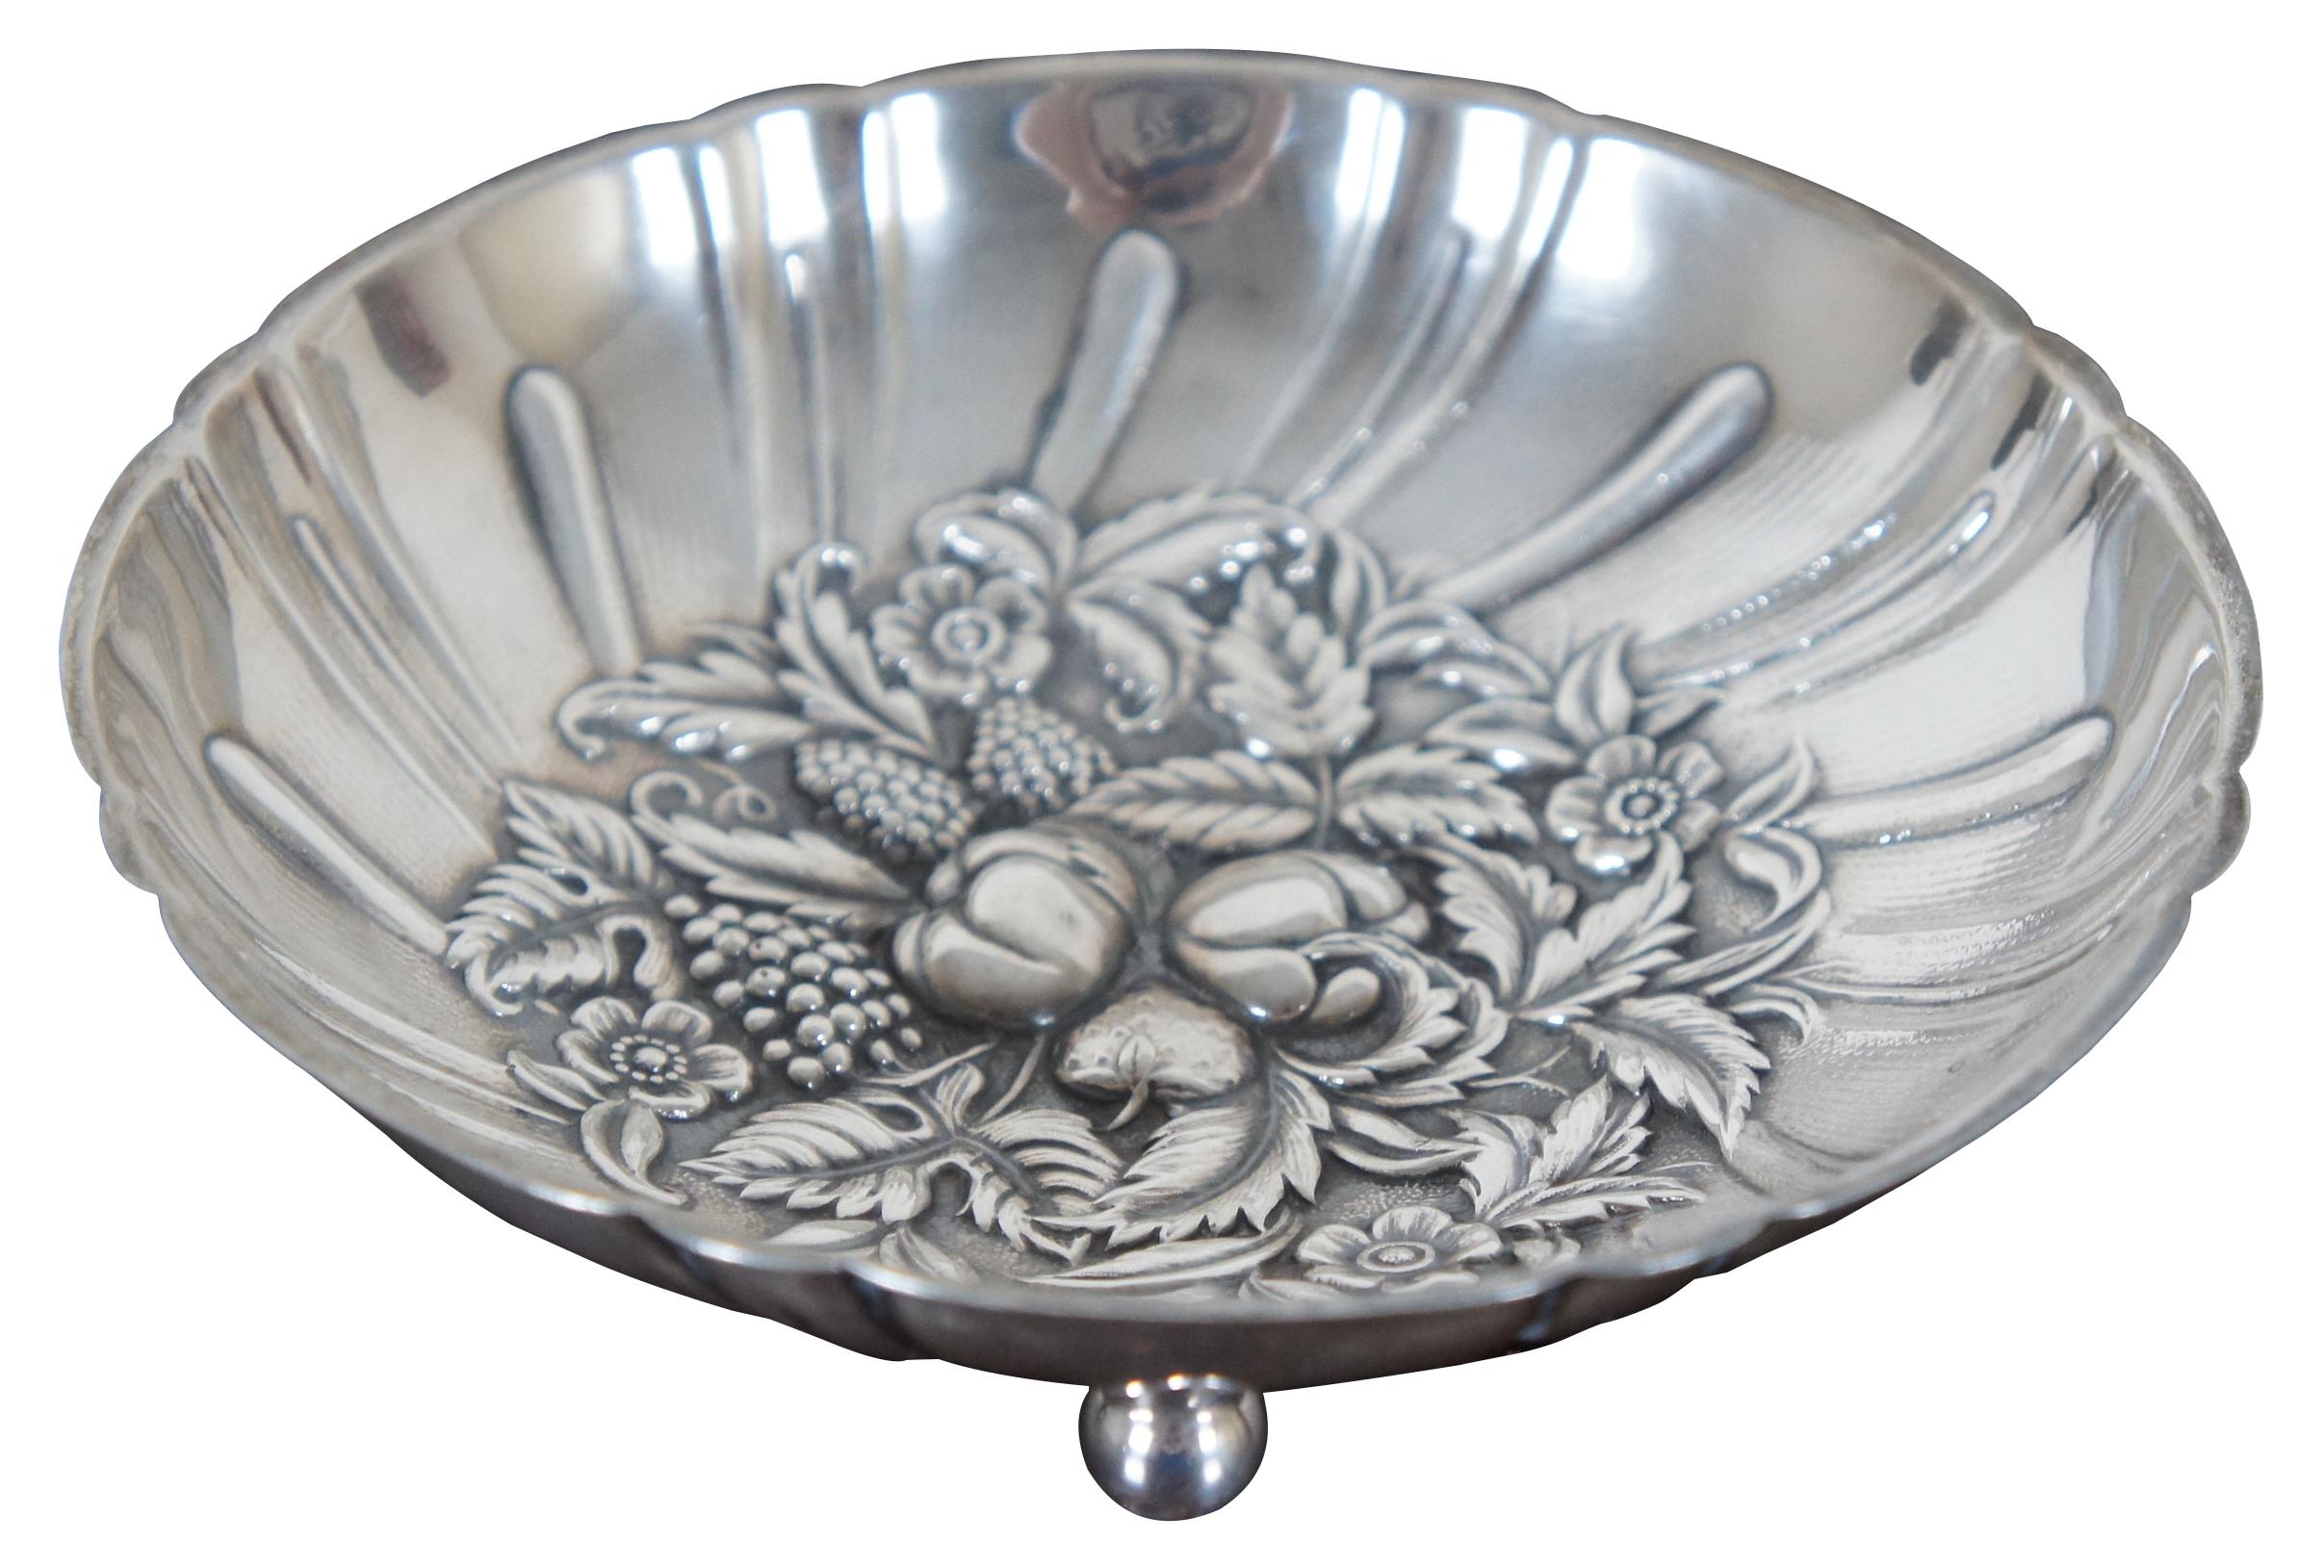 Antique Samuel Kirk & Son number 431 sterling silver .925 repousse berry or nut dish with bun feet and molded fruit and flowers.

Measures: 5.75” x 1.5” / approximately 160 g (Diameter x height/weight).